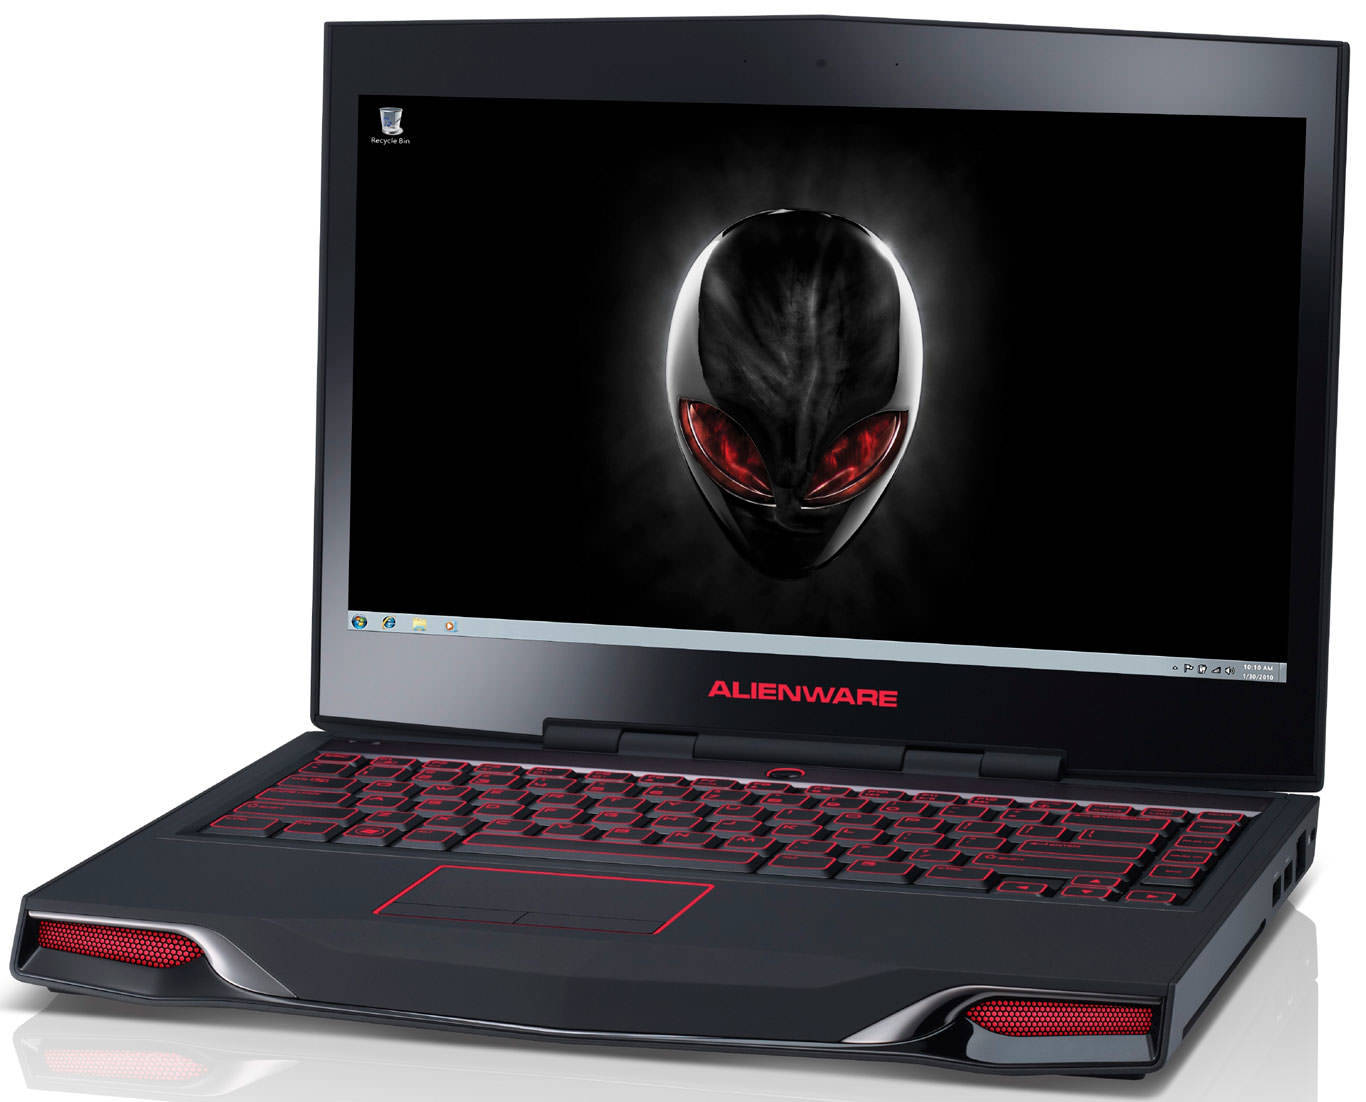 Dell Alienware Laptop M14x Online At Best Price In India 19th Oct Gadgets Now